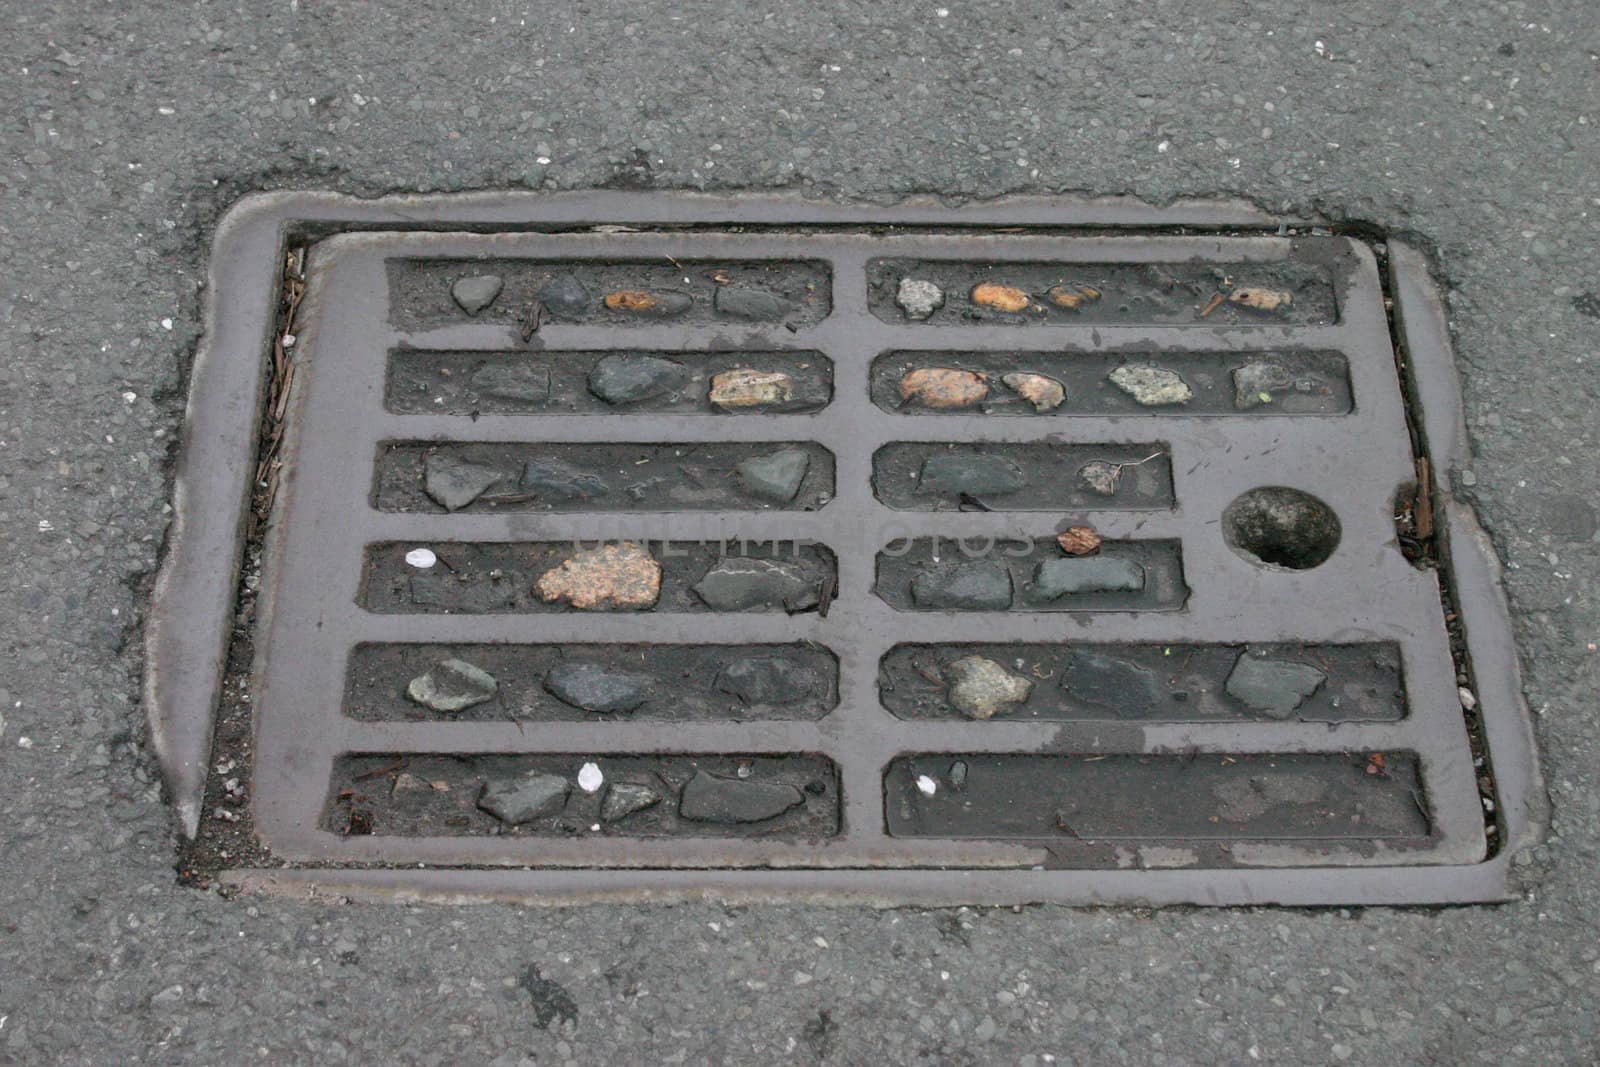 Dirty Drain Grid Packed with Stones